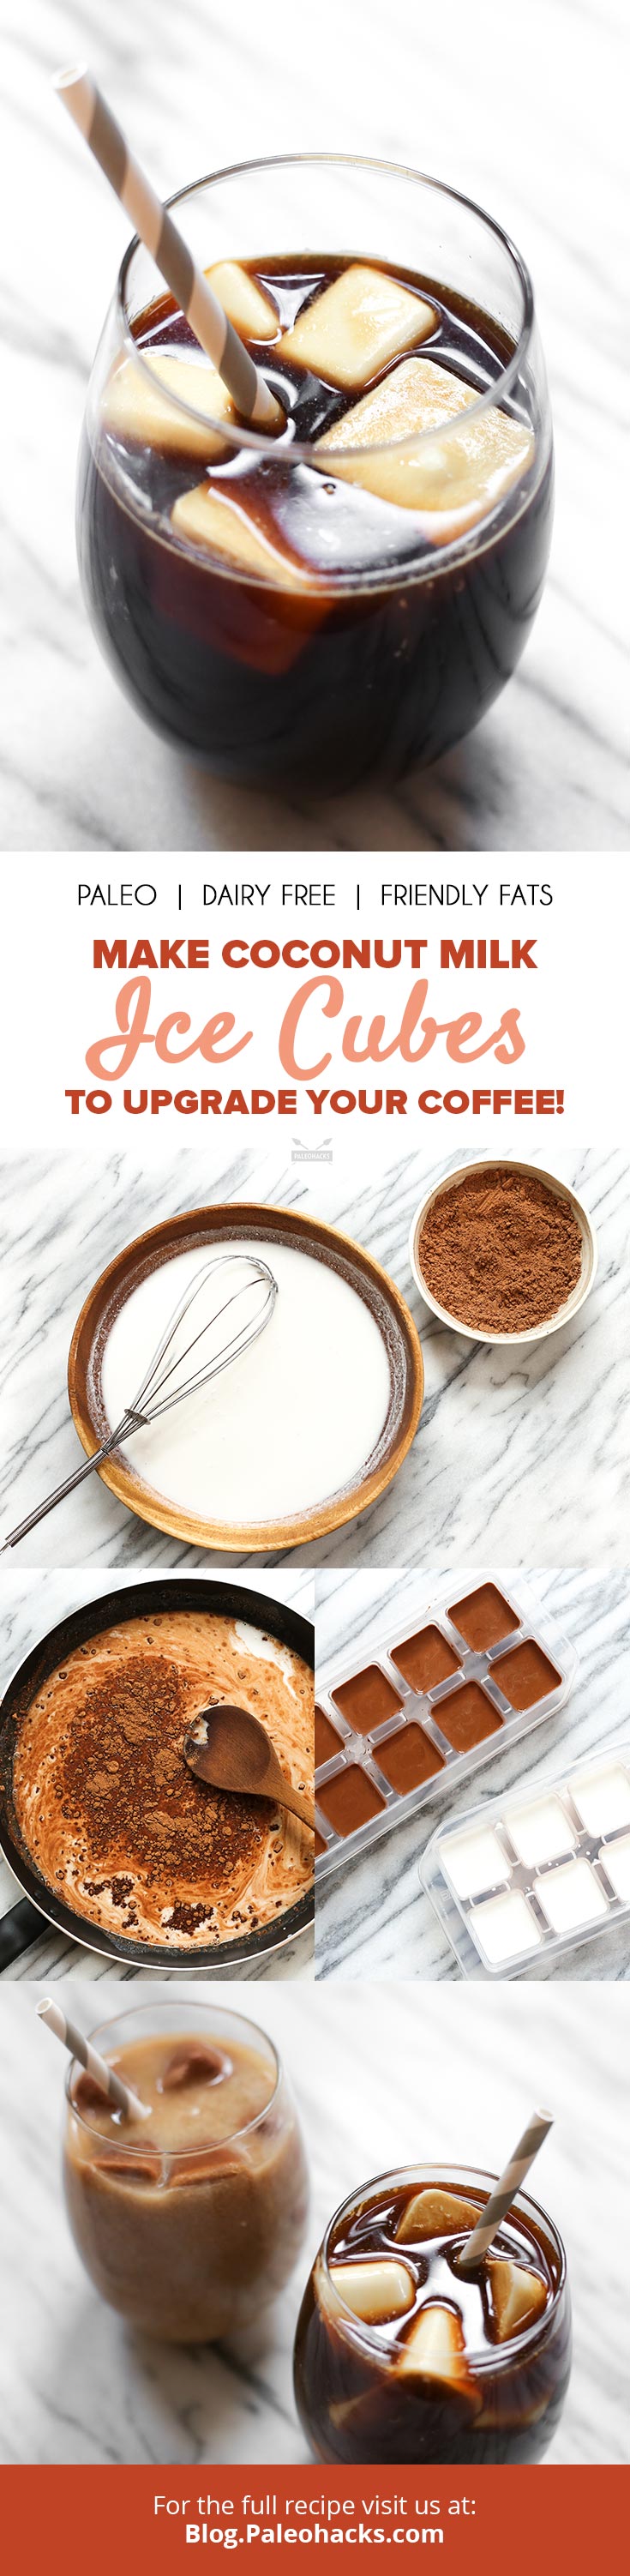 Make a batch of these coconut milk or dark chocolate ice cubes and have creamy, dairy-free iced coffee at a moment’s notice.